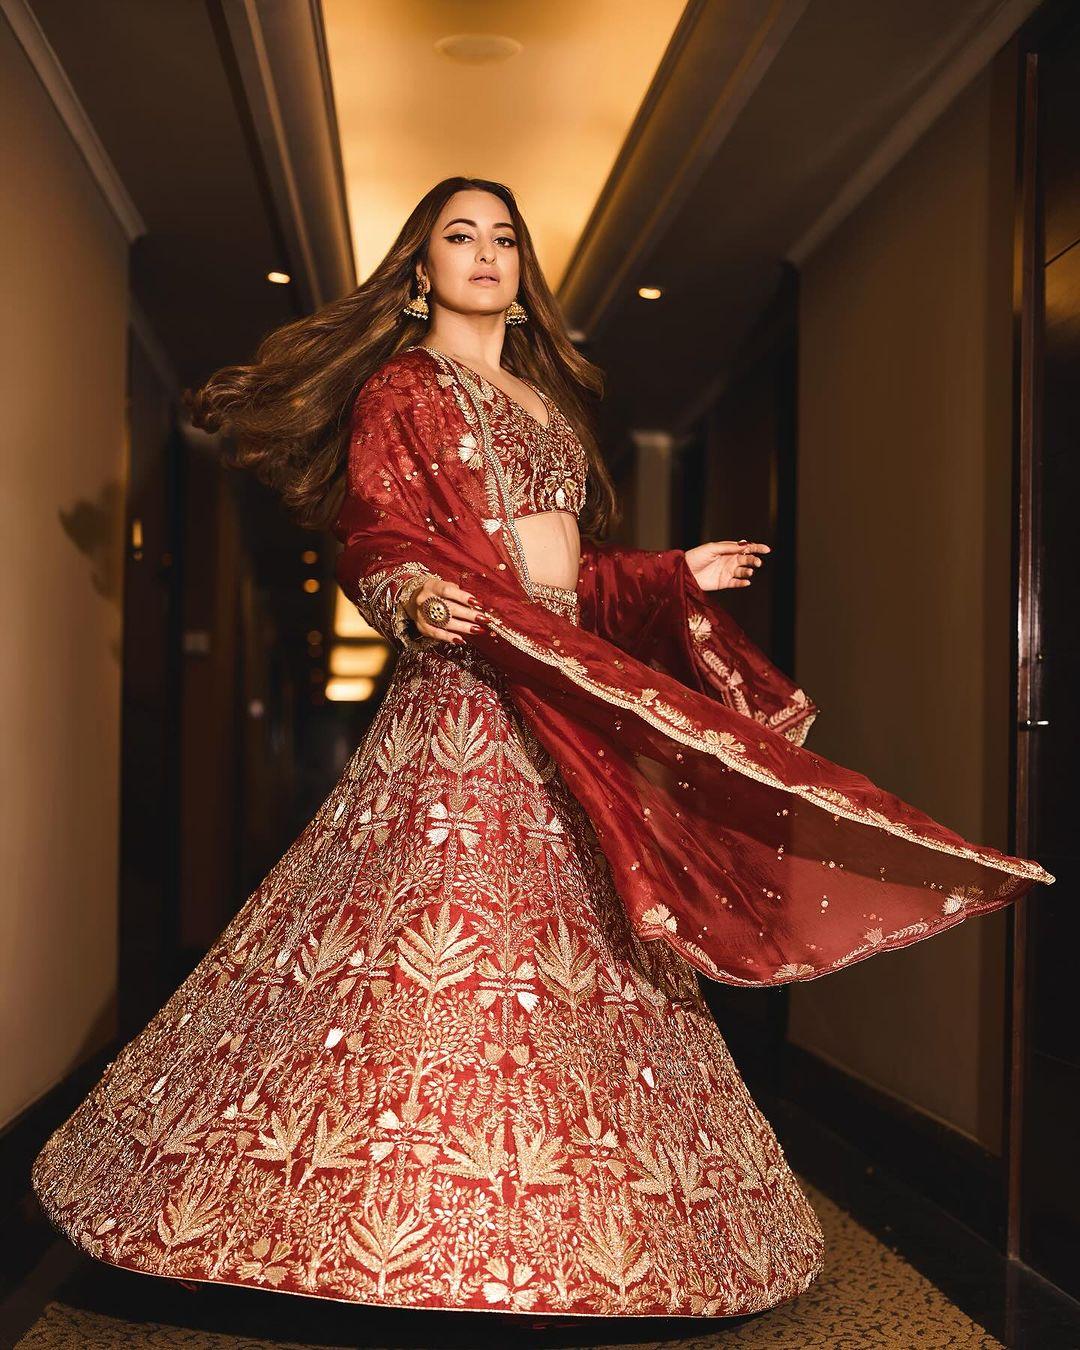 In this look, Sona wore a stunning, heavily embroidered red lehenga paired with a matching blouse and a relatively plain dupatta.